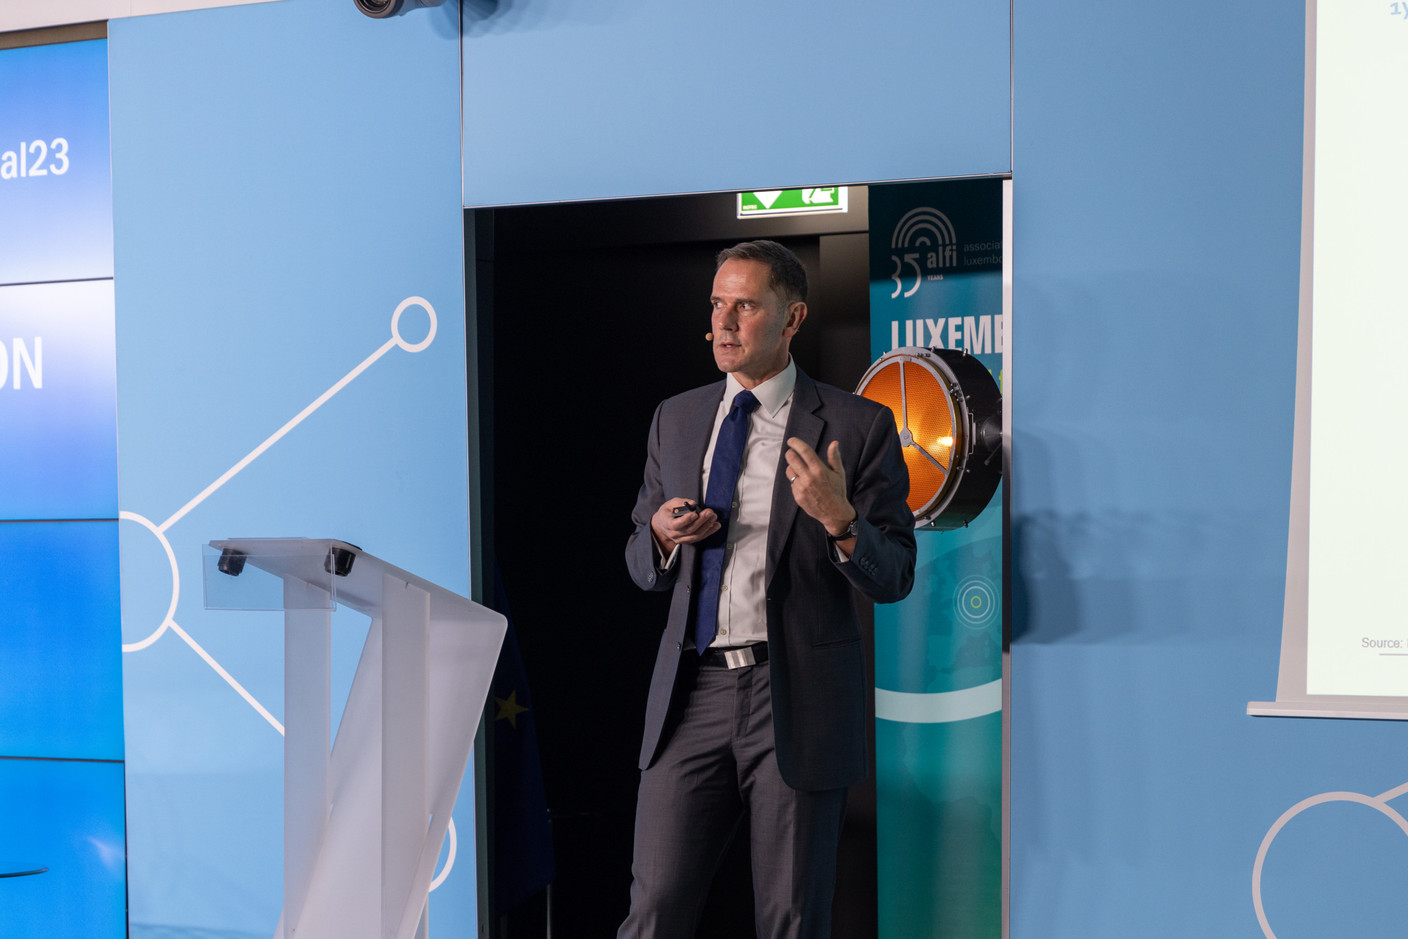 Anton Heese, global fixed income strategist & portfolio manager at Morgan Stanley, speaks on “The key macroeconomics challenges facing the investment management sector” during Alfi’s Global Distribution Conference, 20 September 2023. Photo: Romain Gamba/Maison Moderne